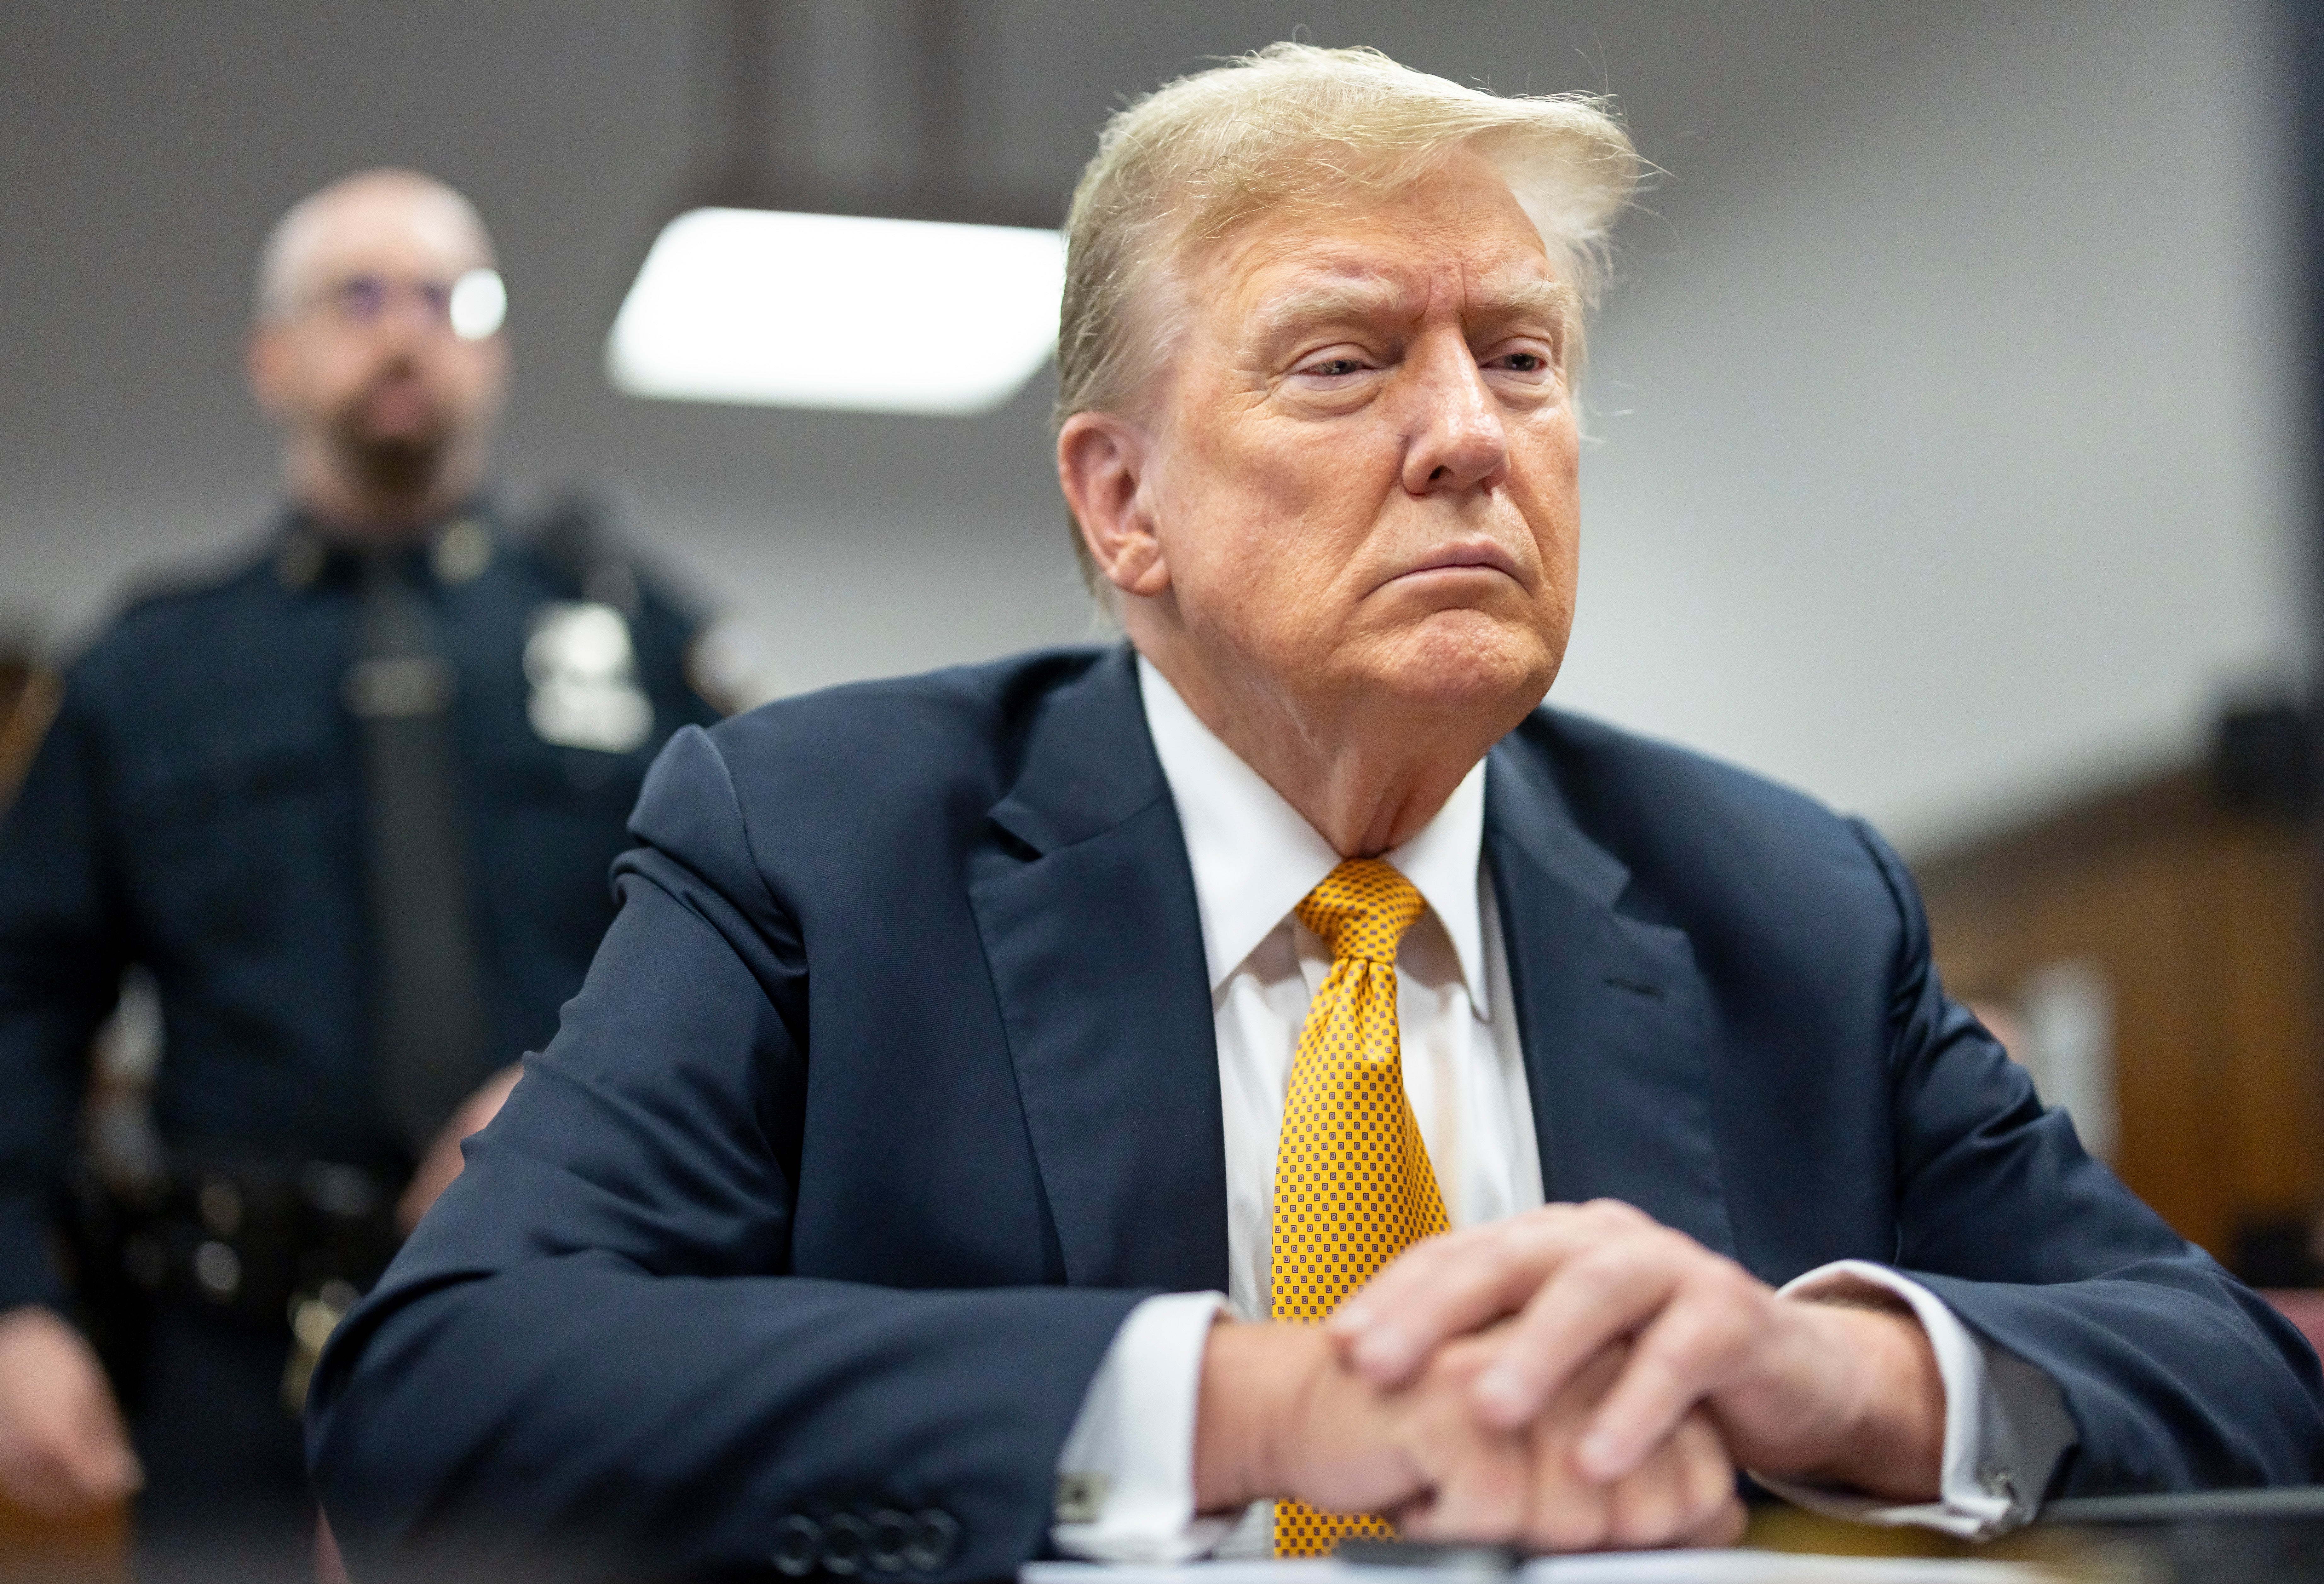 Trump has spent the majority of his time as a criminal defendant sitting nearly motionless, for hours, leaning back in his chair with his eyes closed